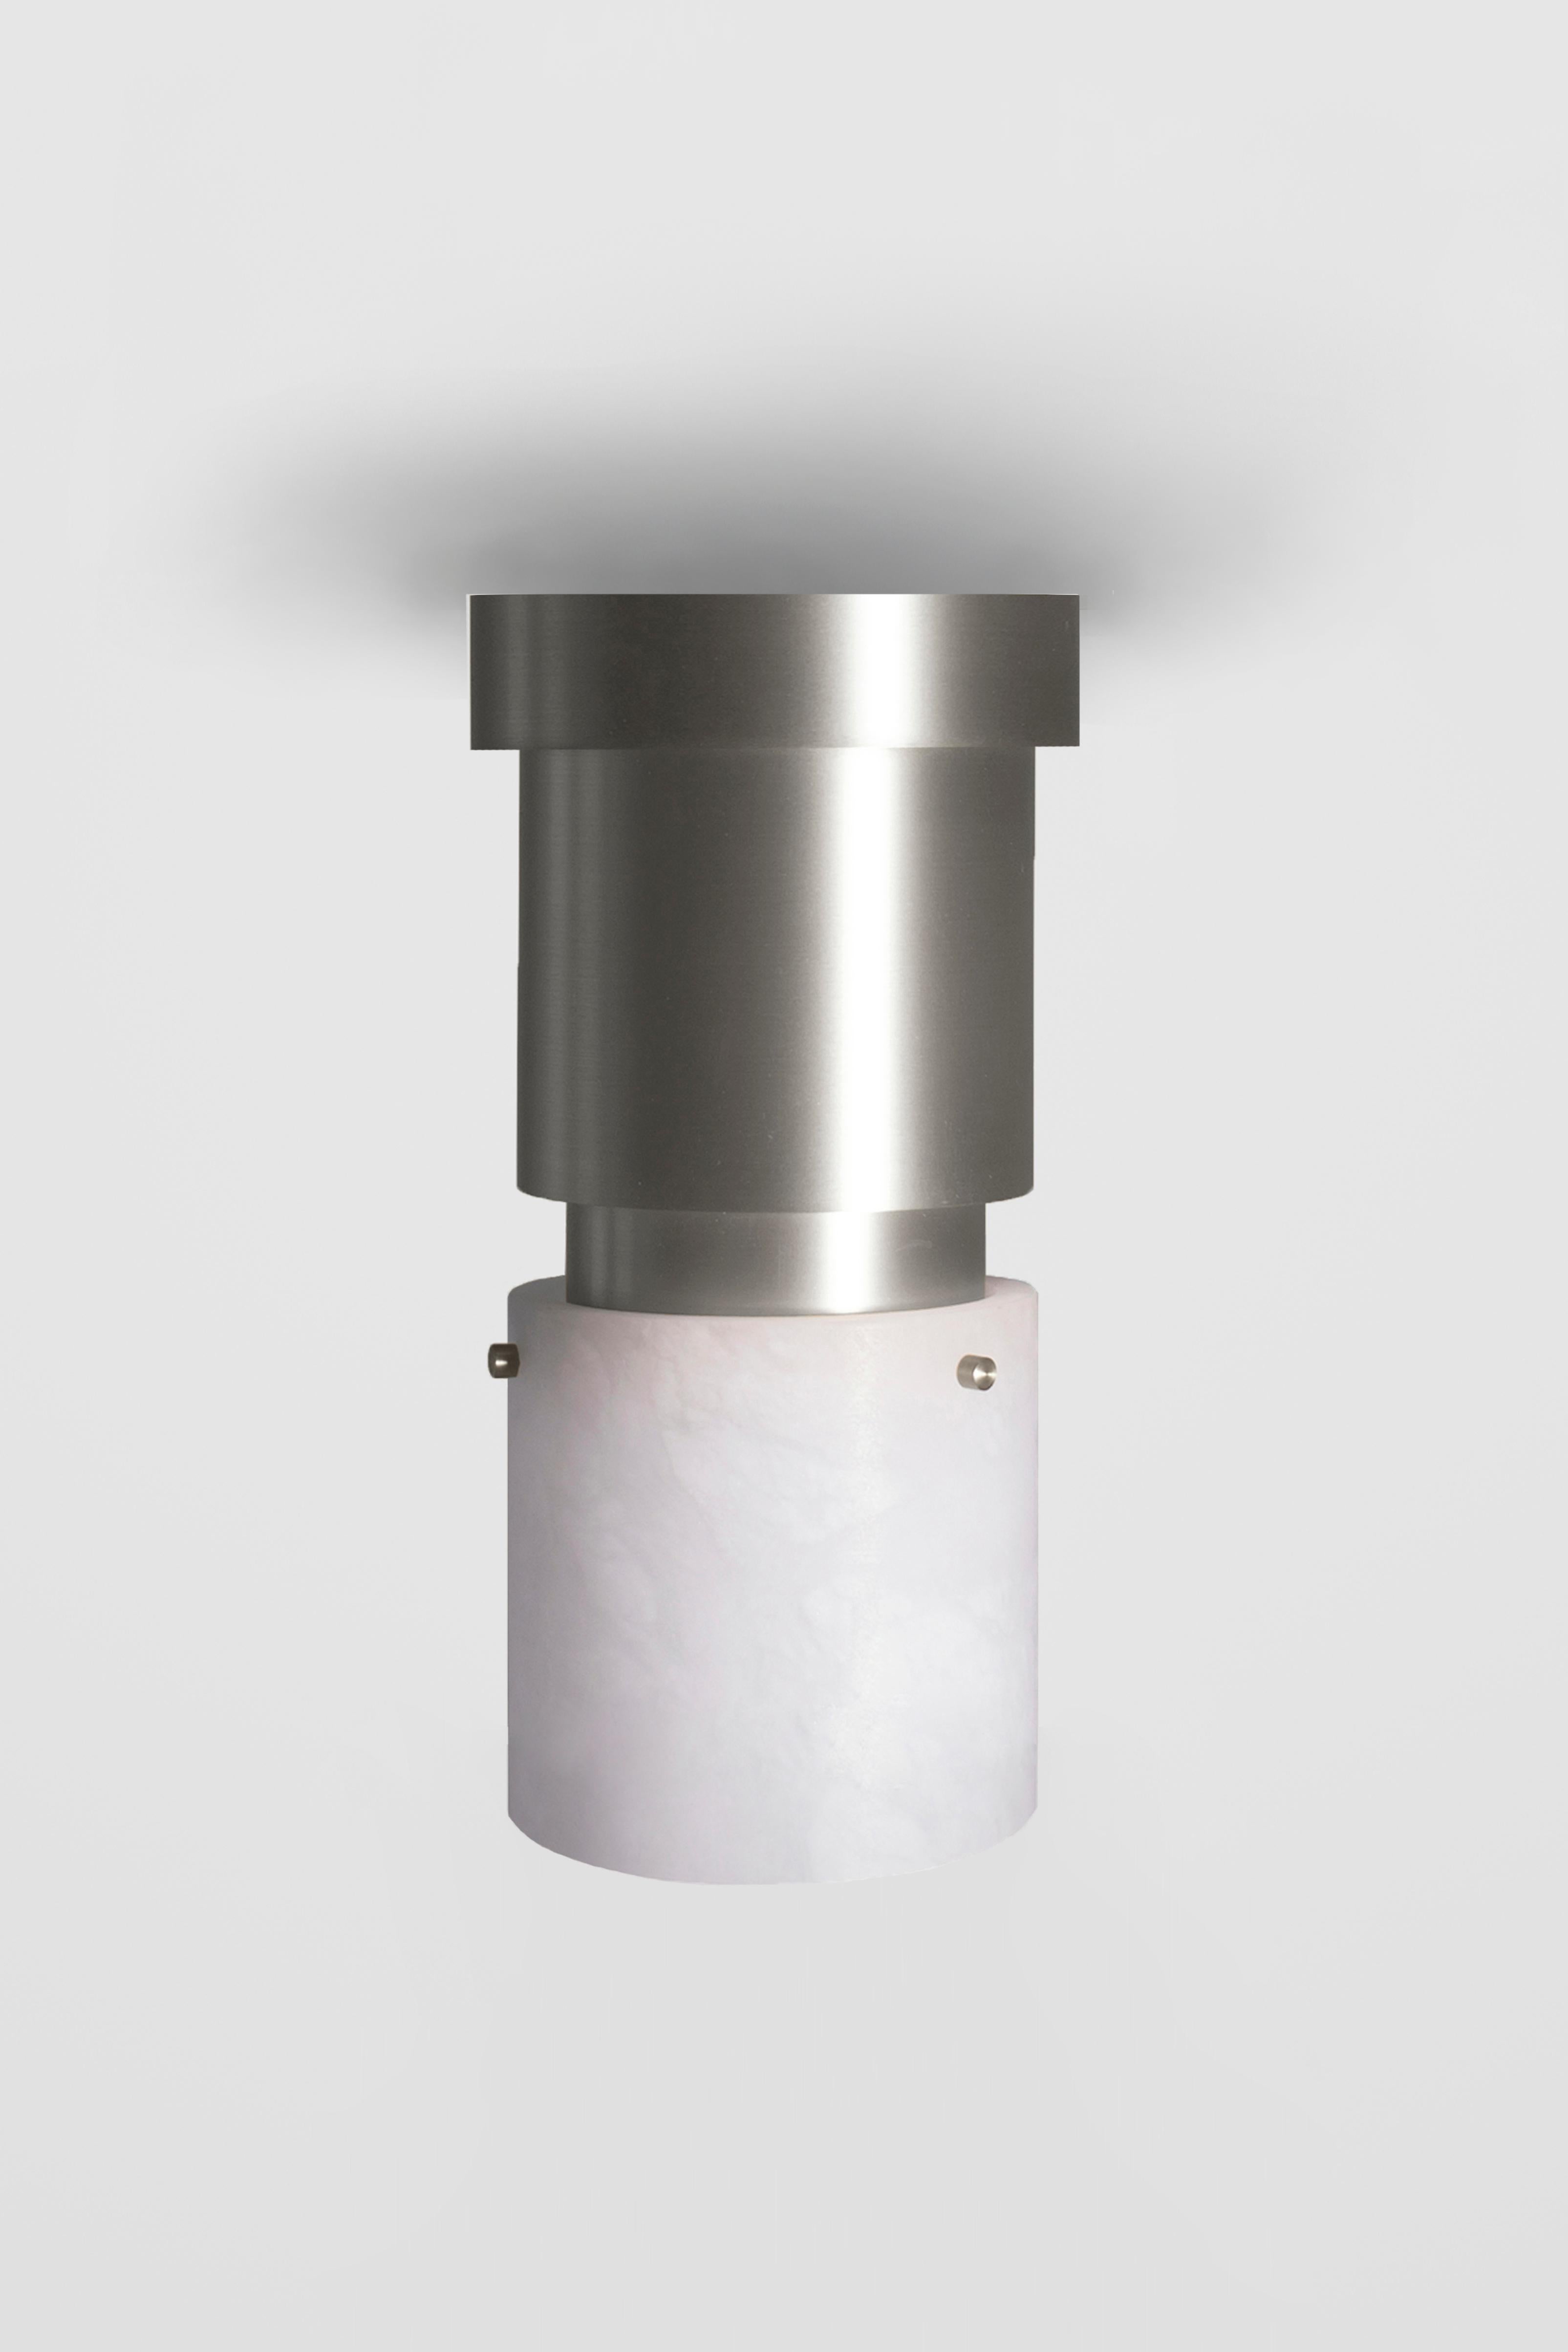 Orphan Work 000 Flush Mount
Shown in brushed nickel and alabaster
Available in brushed brass, brushed nickel and blackened brass
Measures: 13”H X 5 7/8”D
UL approved
Holds (1) 60w candelabra bulb
must use LED bulb 

Orphan Work is designed to